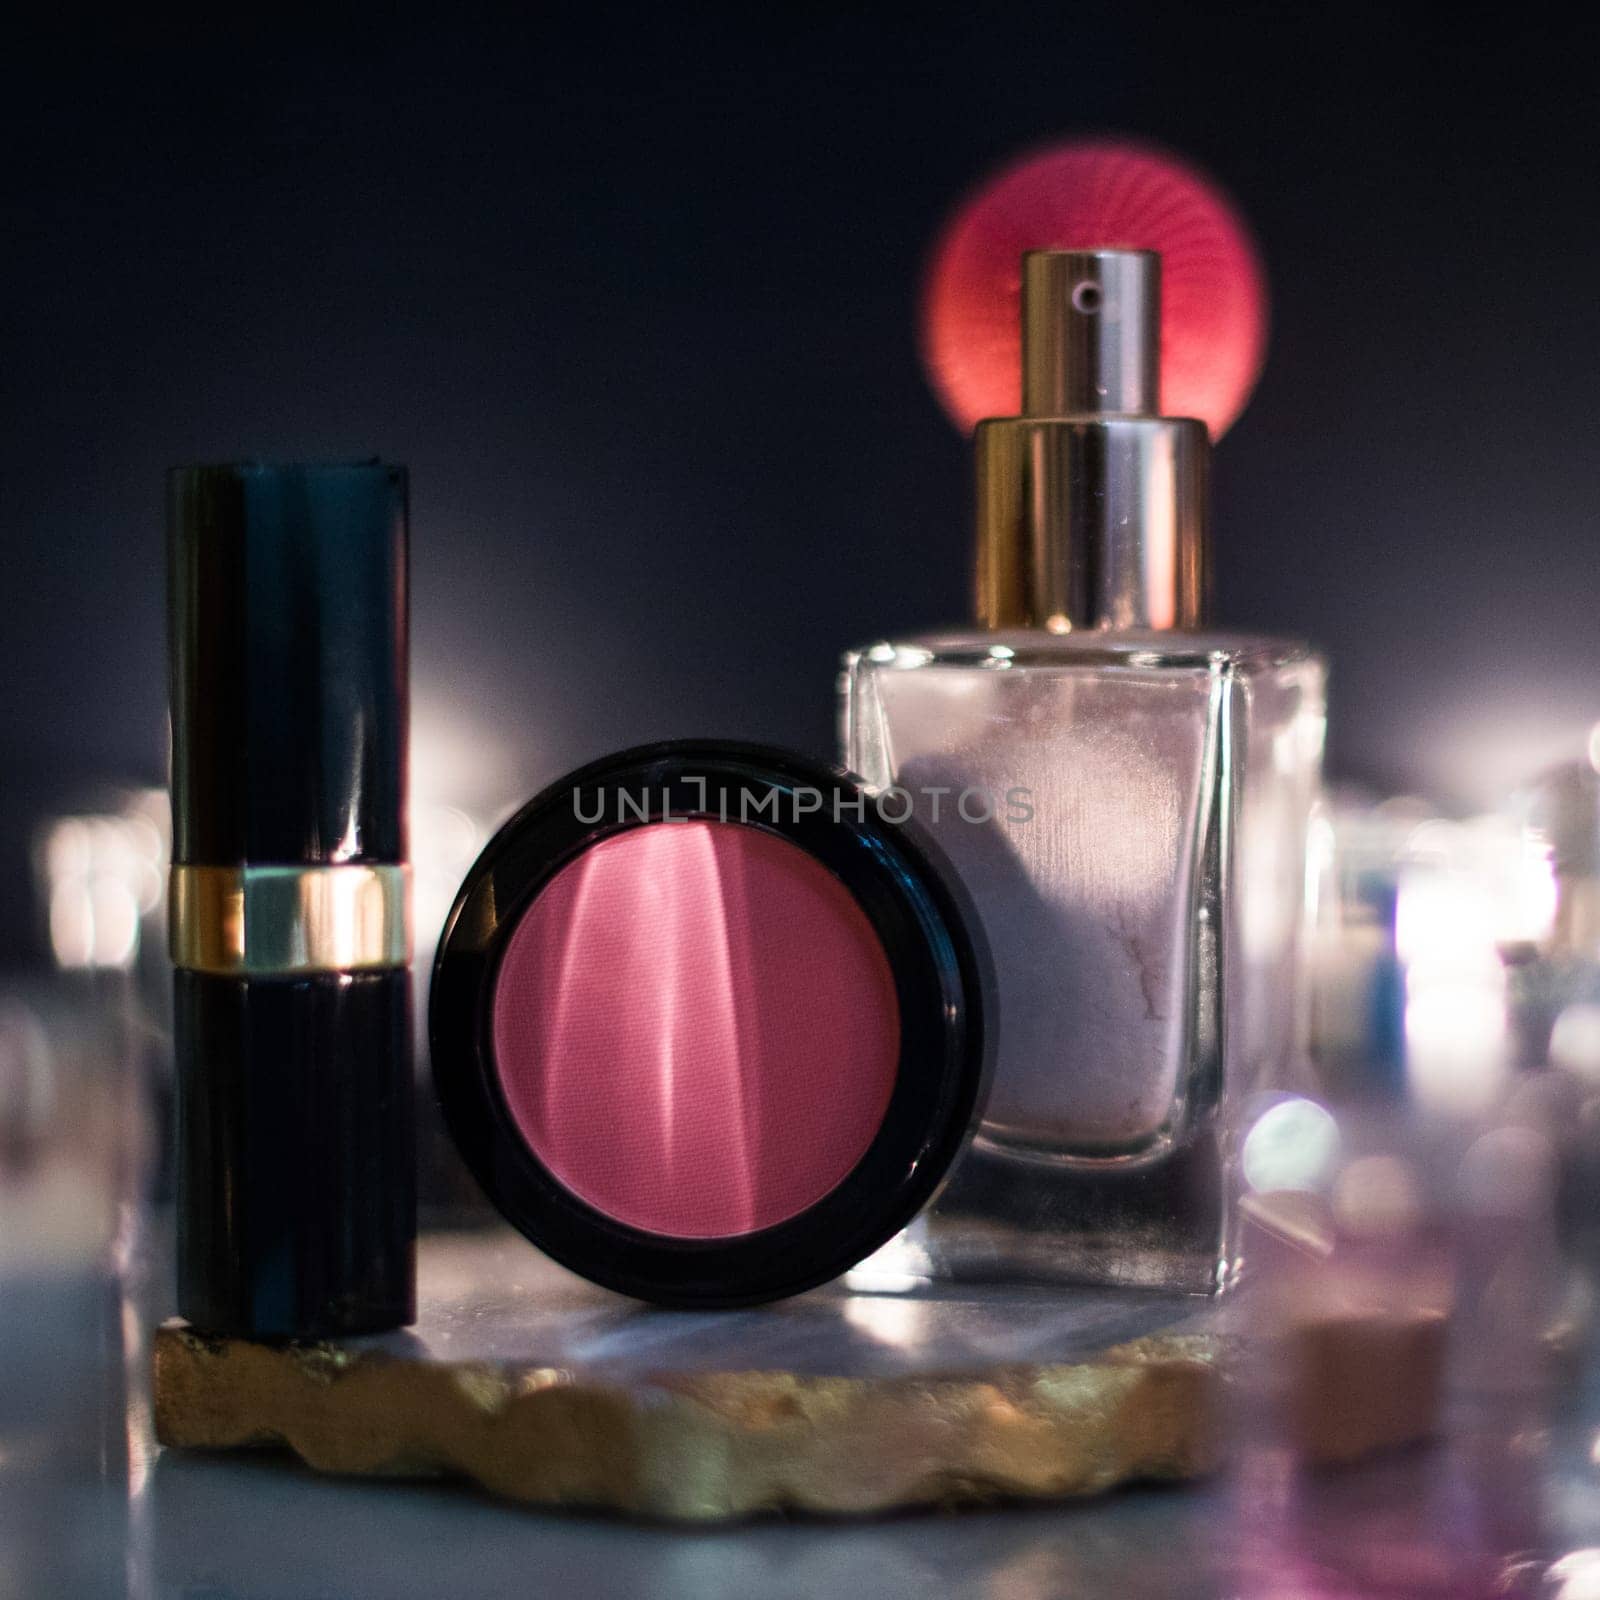 luxury make-up products, cosmetic set - beauty makeup styled concept, elegant visuals